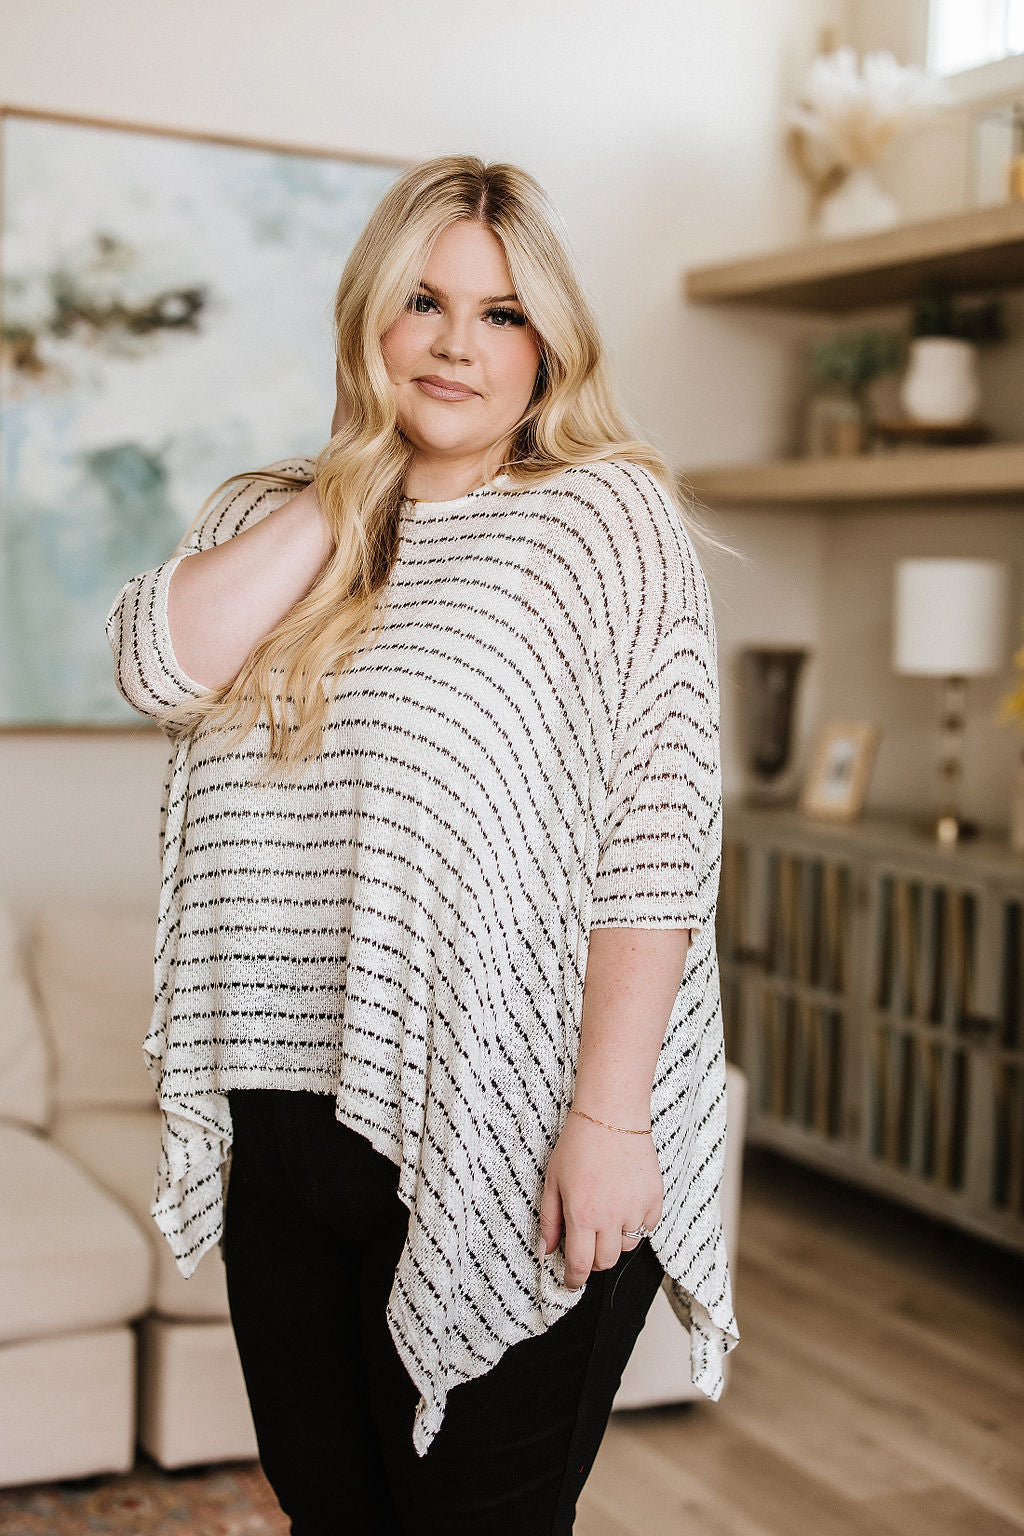 Meyers Striped High Low Boxy Top (Ships in 1-2 Weeks)